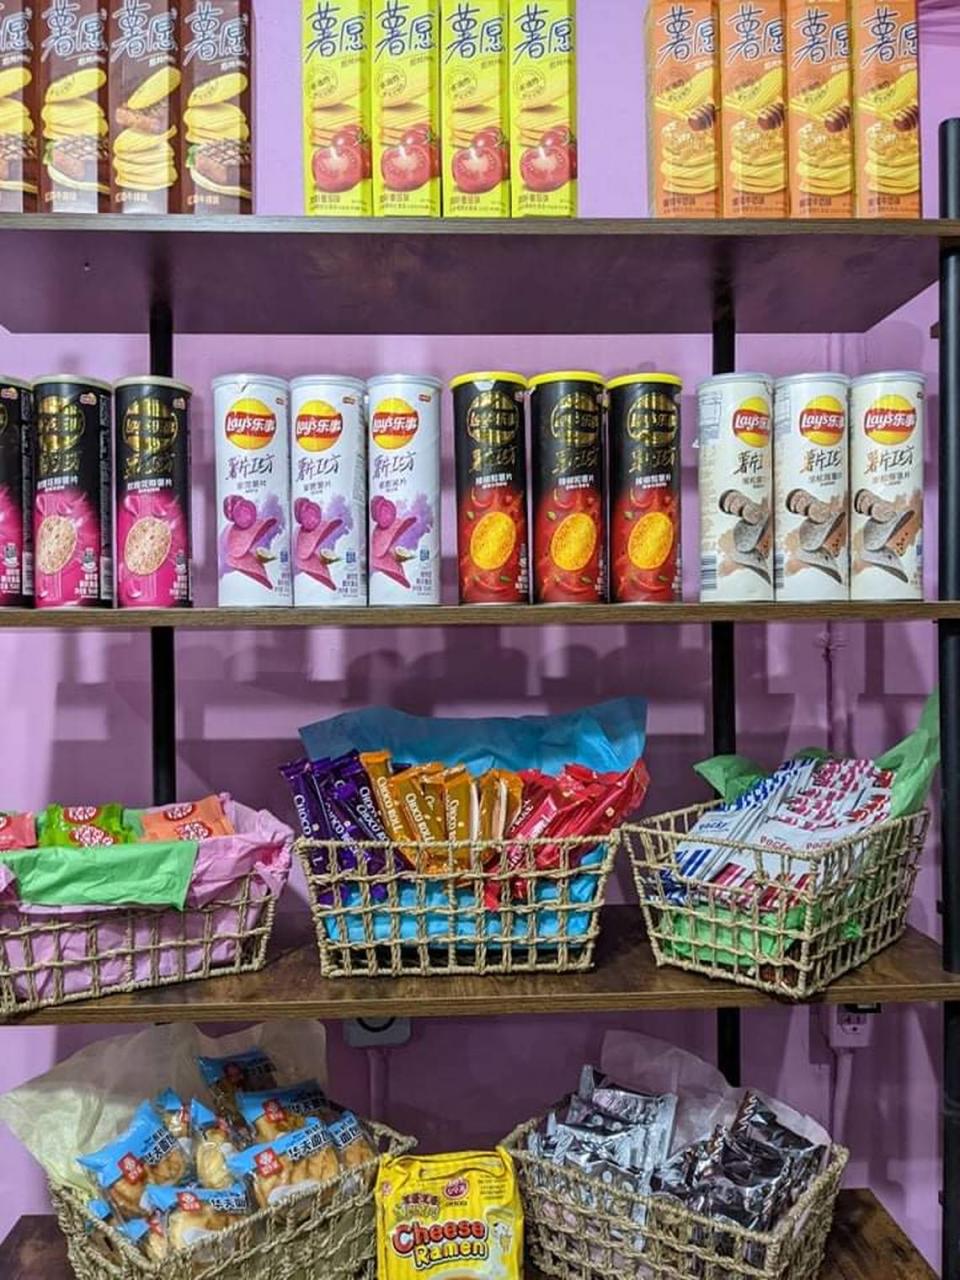 Hello Boba Cafe opening soon in downtown Macon will also offer pre-packaged Asian snacks like Pocky cookies and Lay’s spicy crawfish flavored potato chips — “things that you don’t see at your typical grocery store,” said owner Renee Tu.